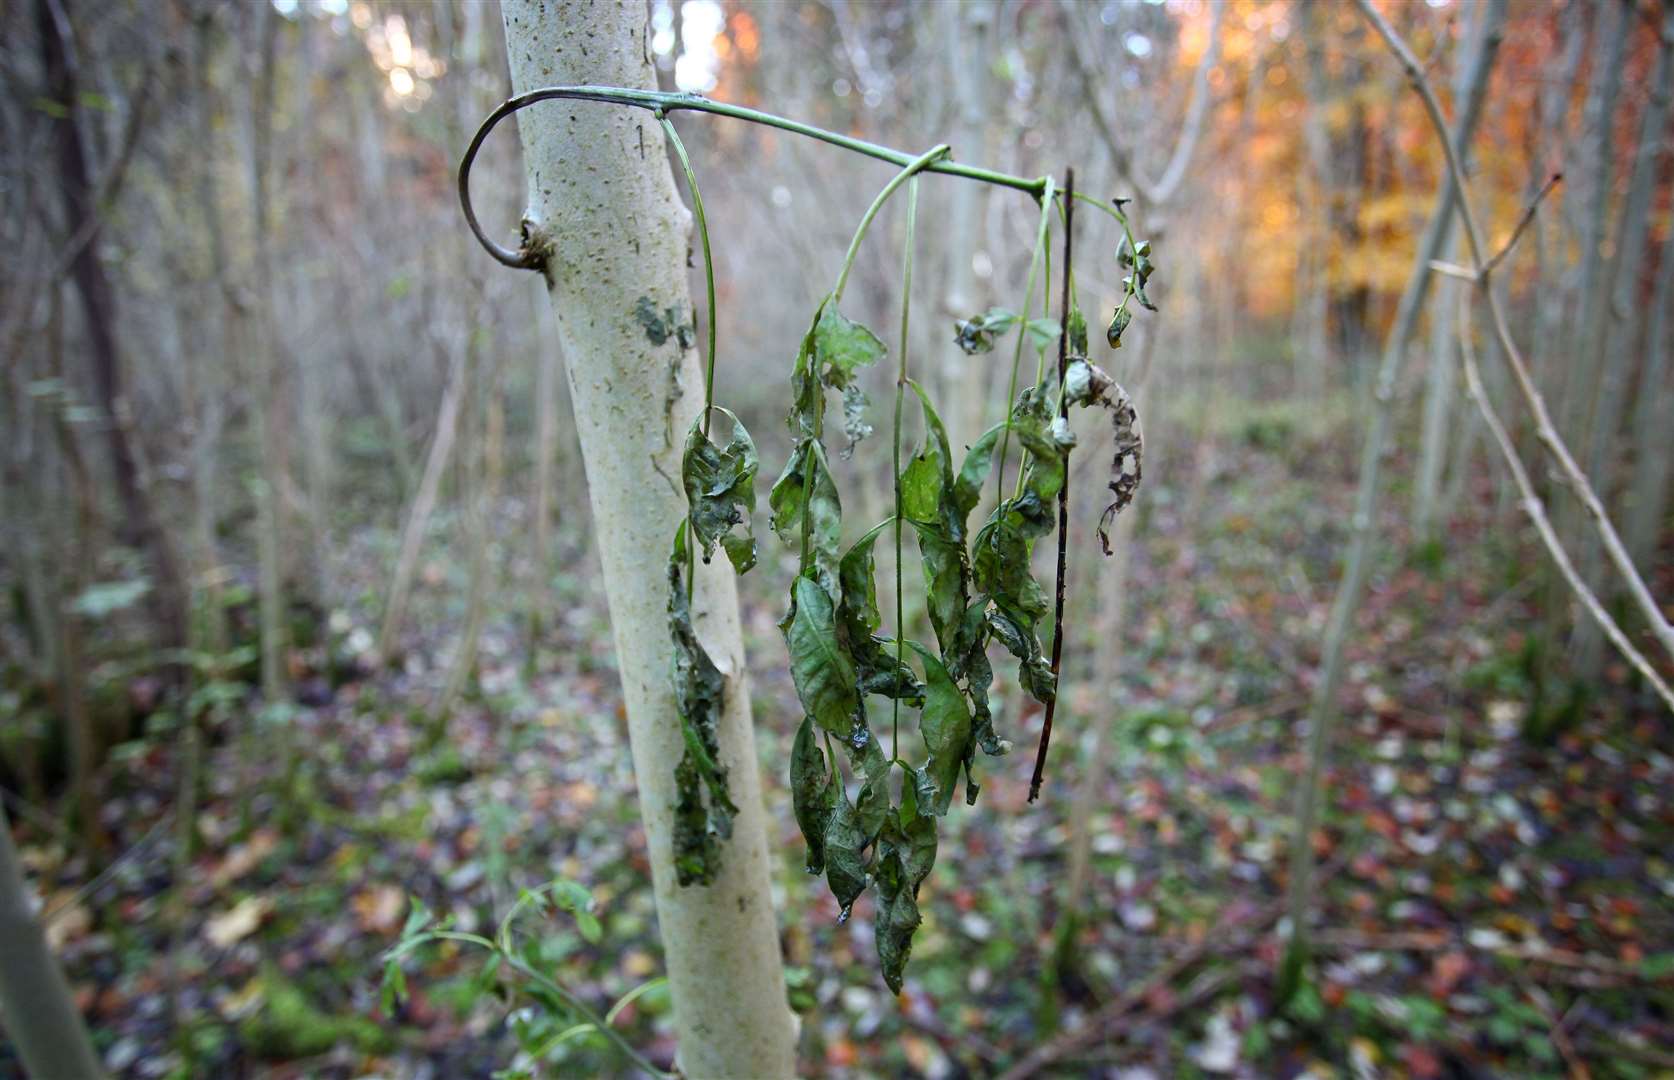 Ash dieback is expected to kill the majority of ash trees in the UK (Gareth Fuller/PA)